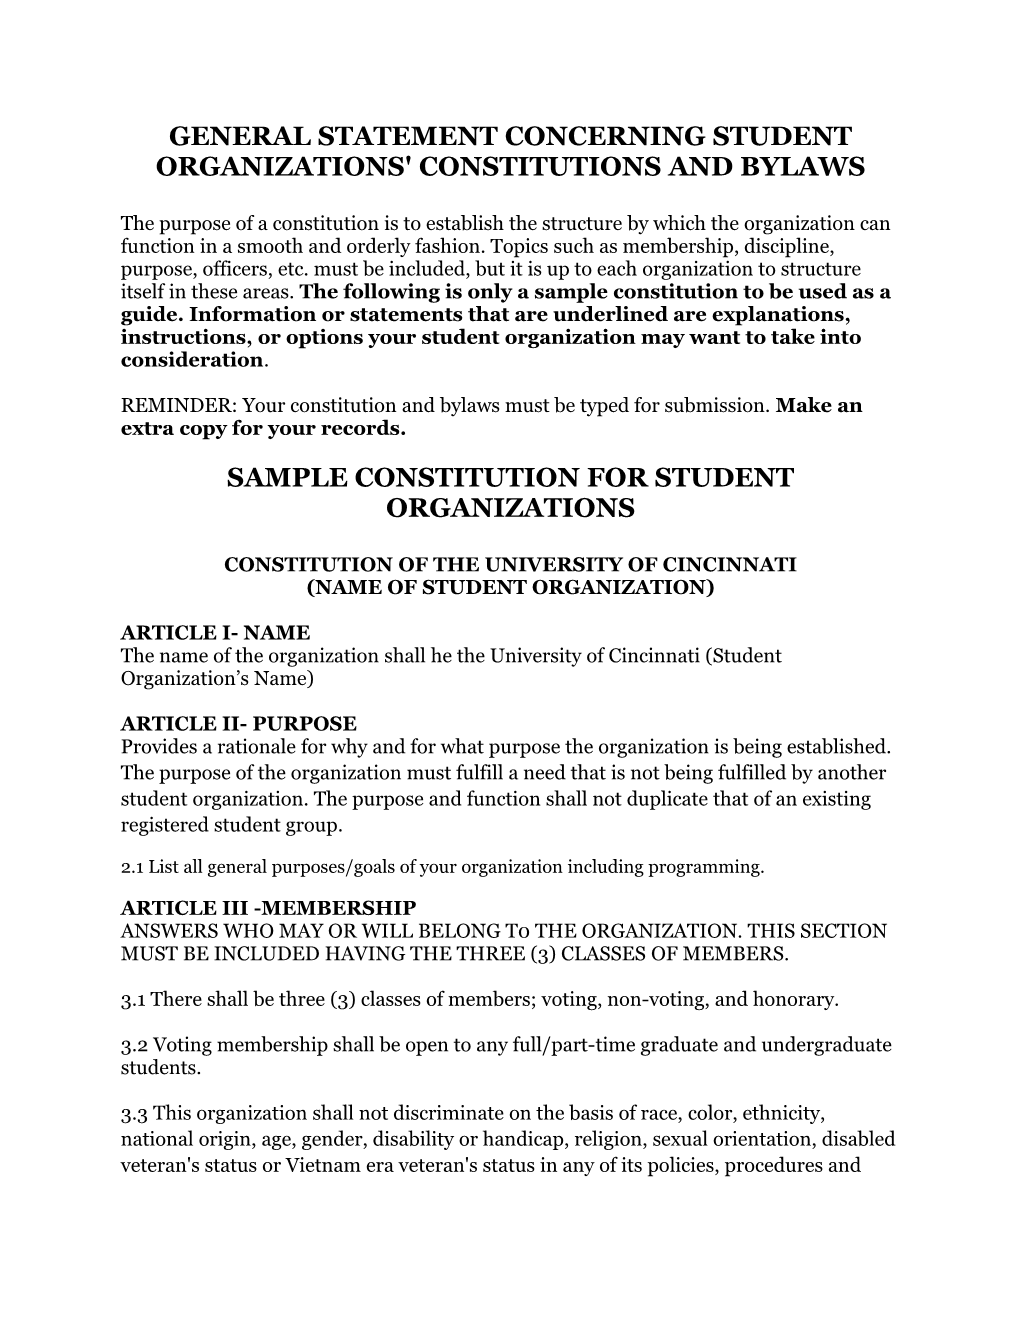 General Statement Concerning Student Organizations' Constitutions and Bylaws